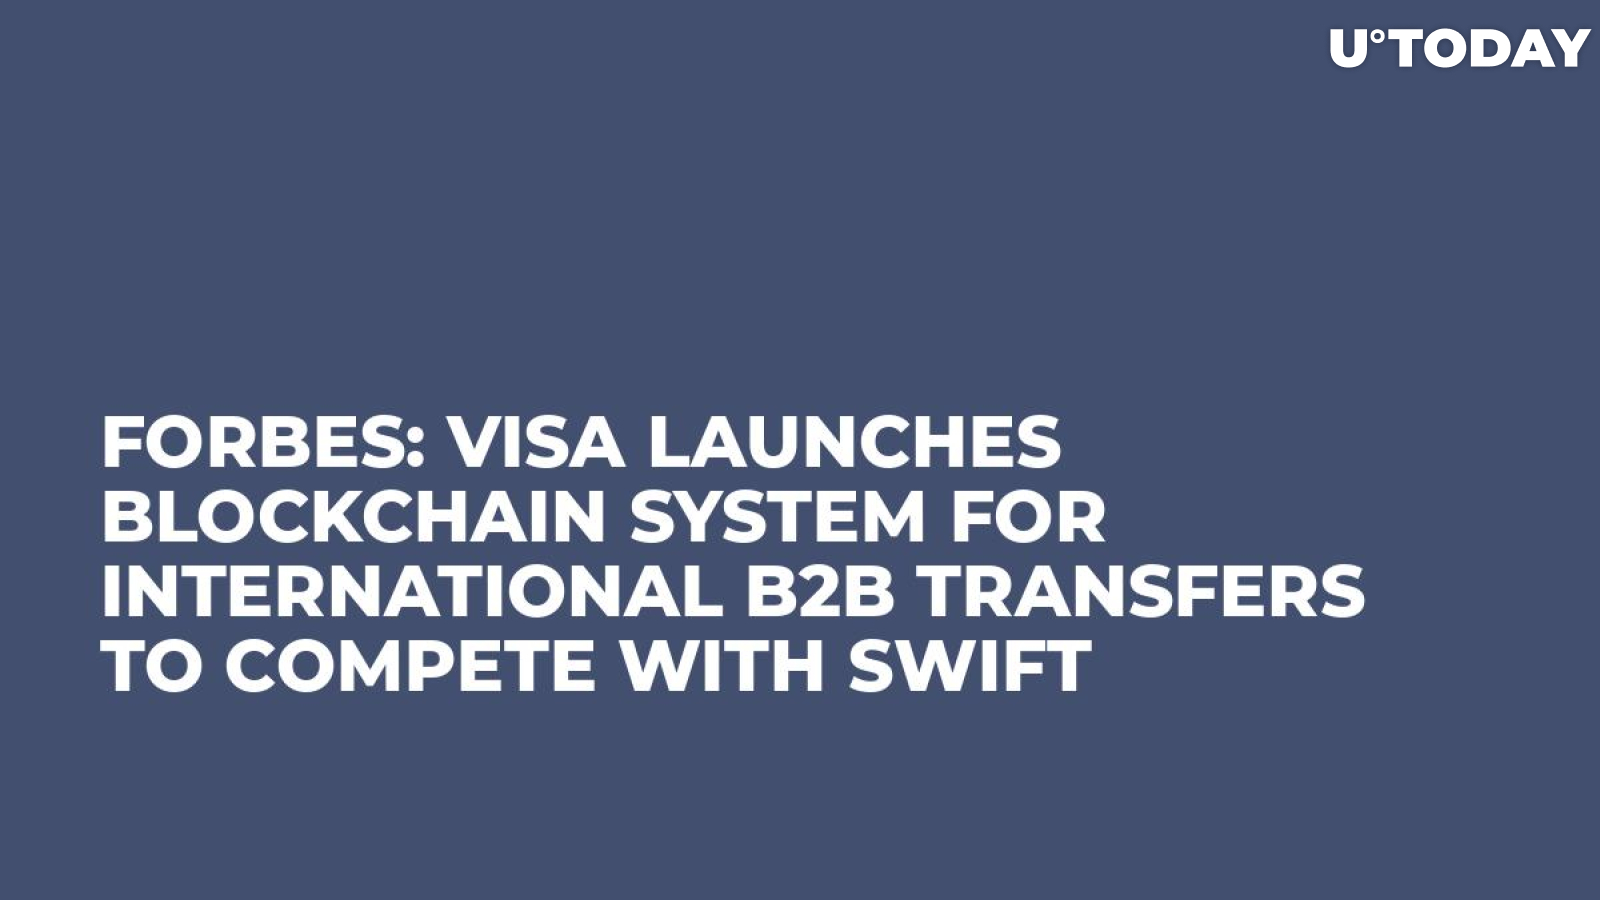 Forbes: Visa Launches Blockchain System for International B2B Transfers to Compete with SWIFT